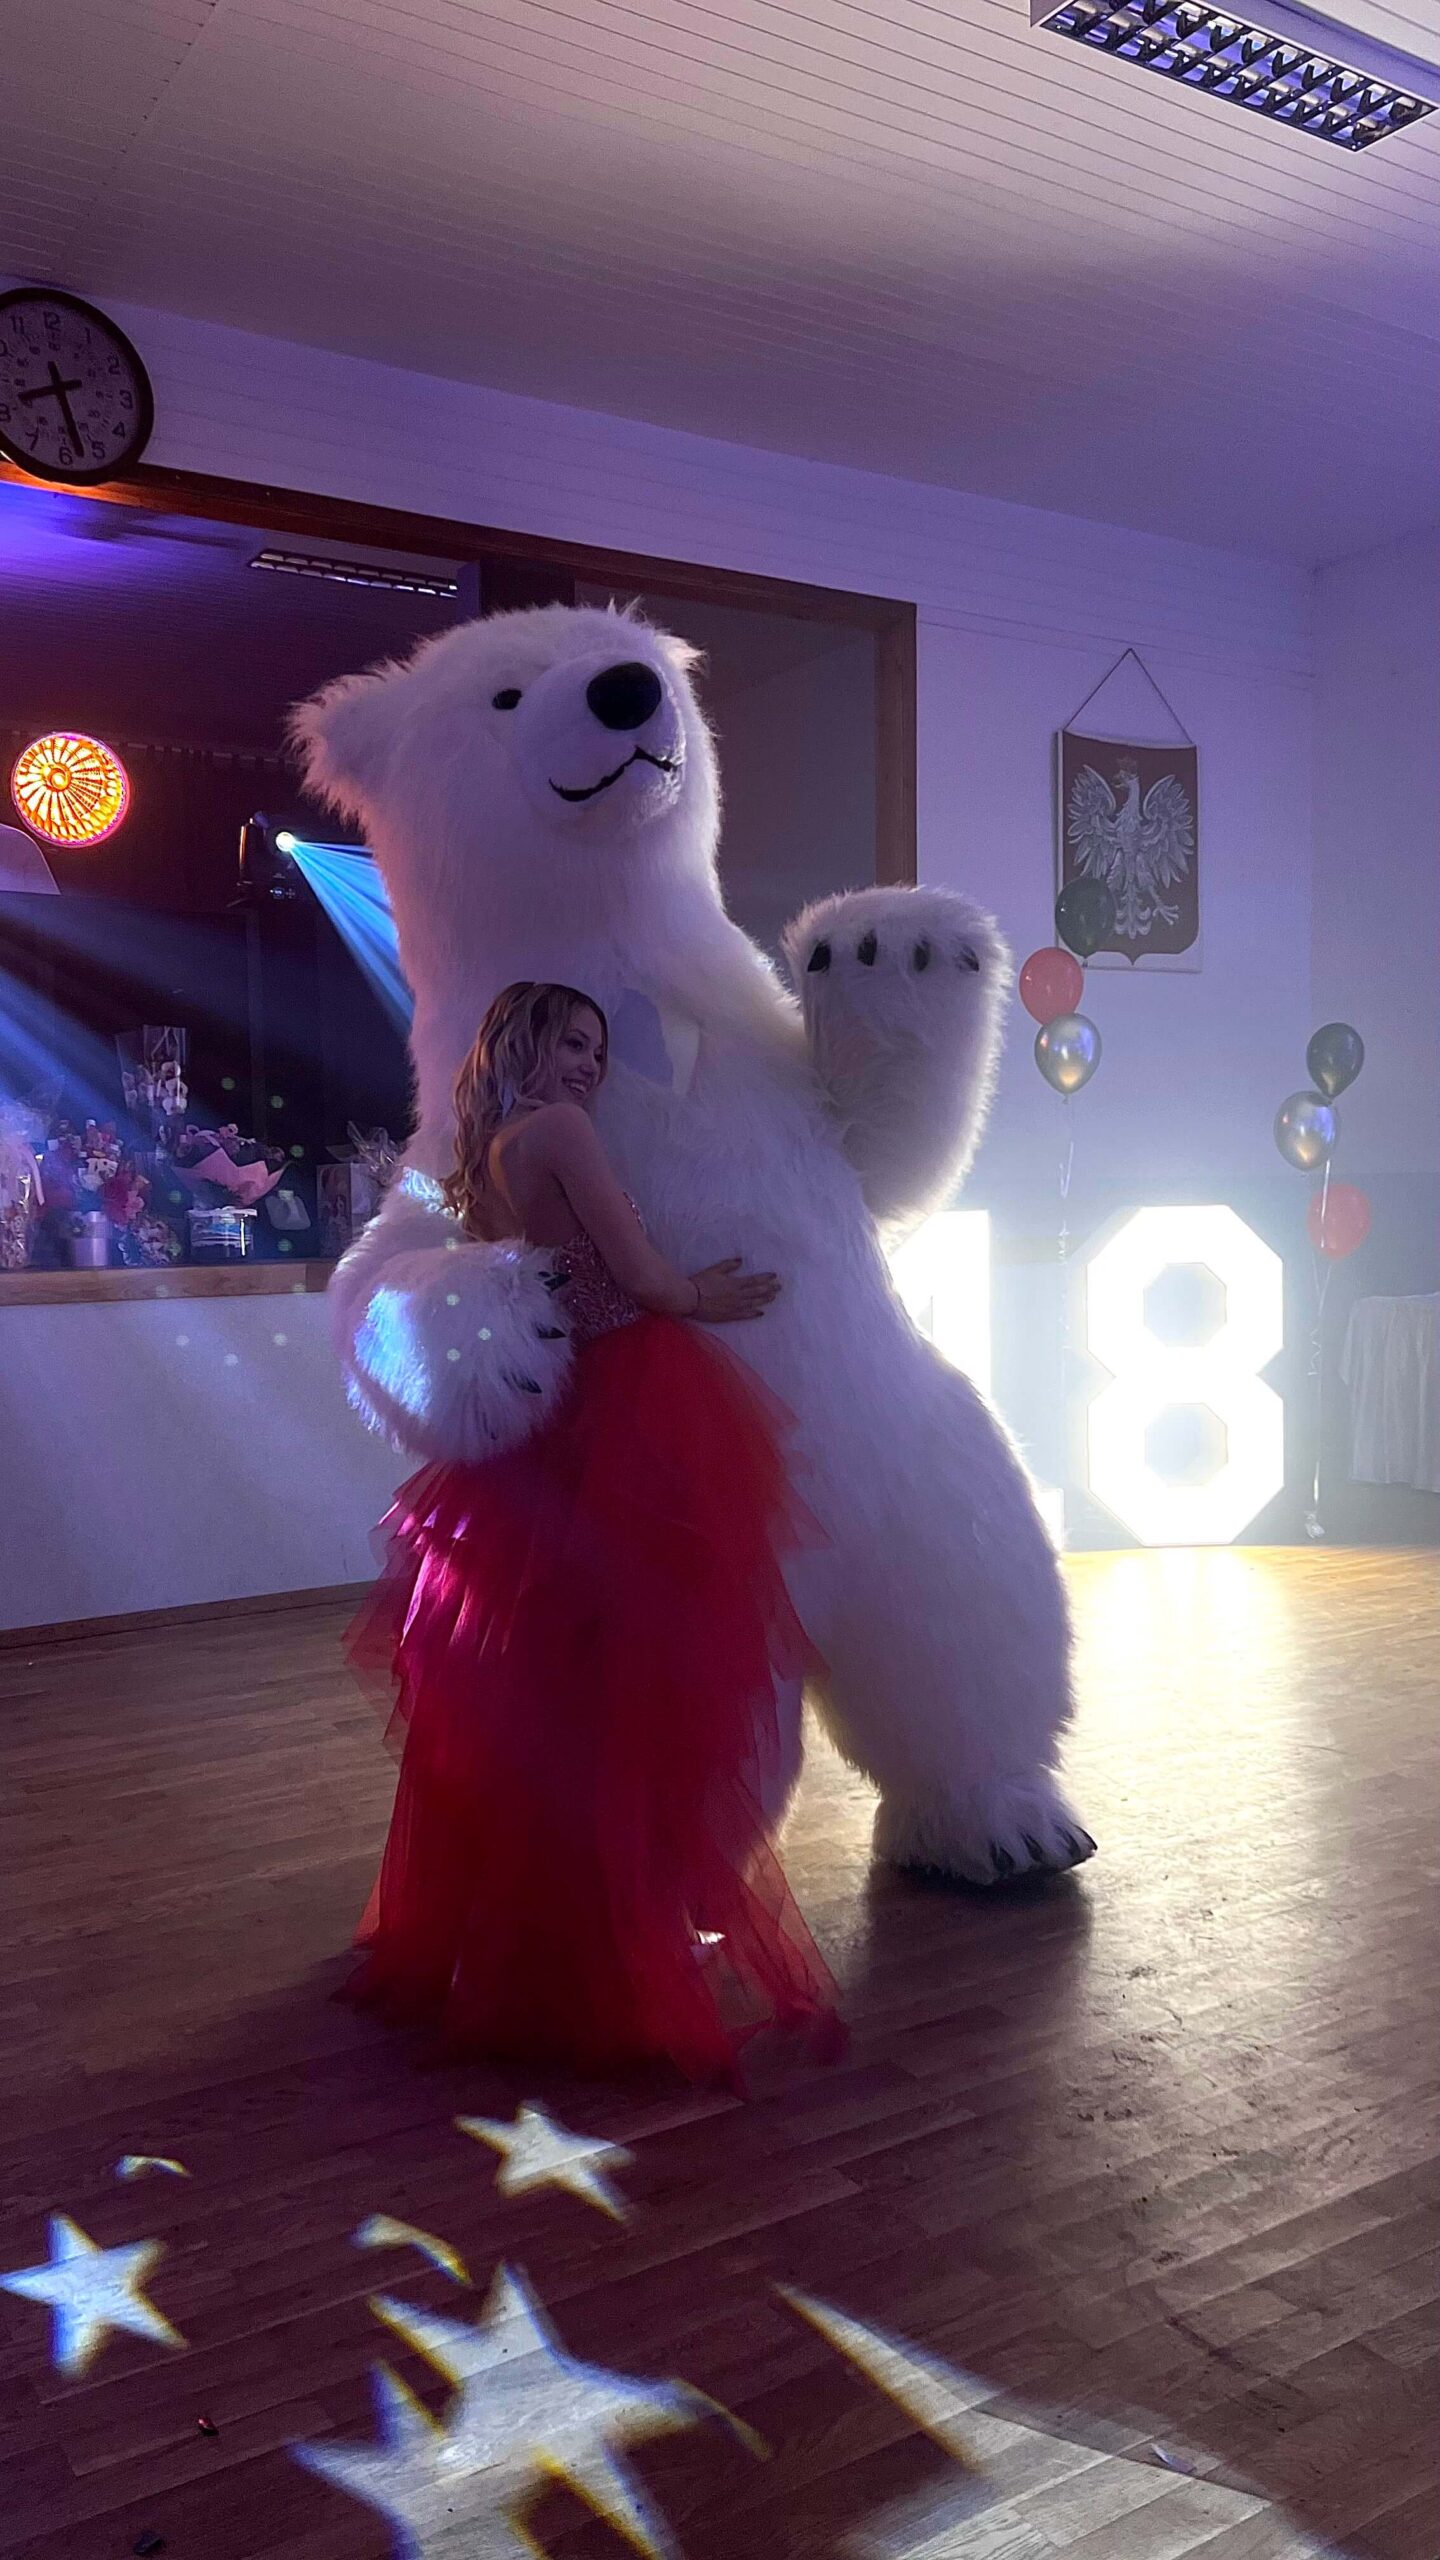 A young woman in a red dress embracing a person in a polar bear costume at a dance event, with '18' light up numbers and star-shaped lights on the floor.